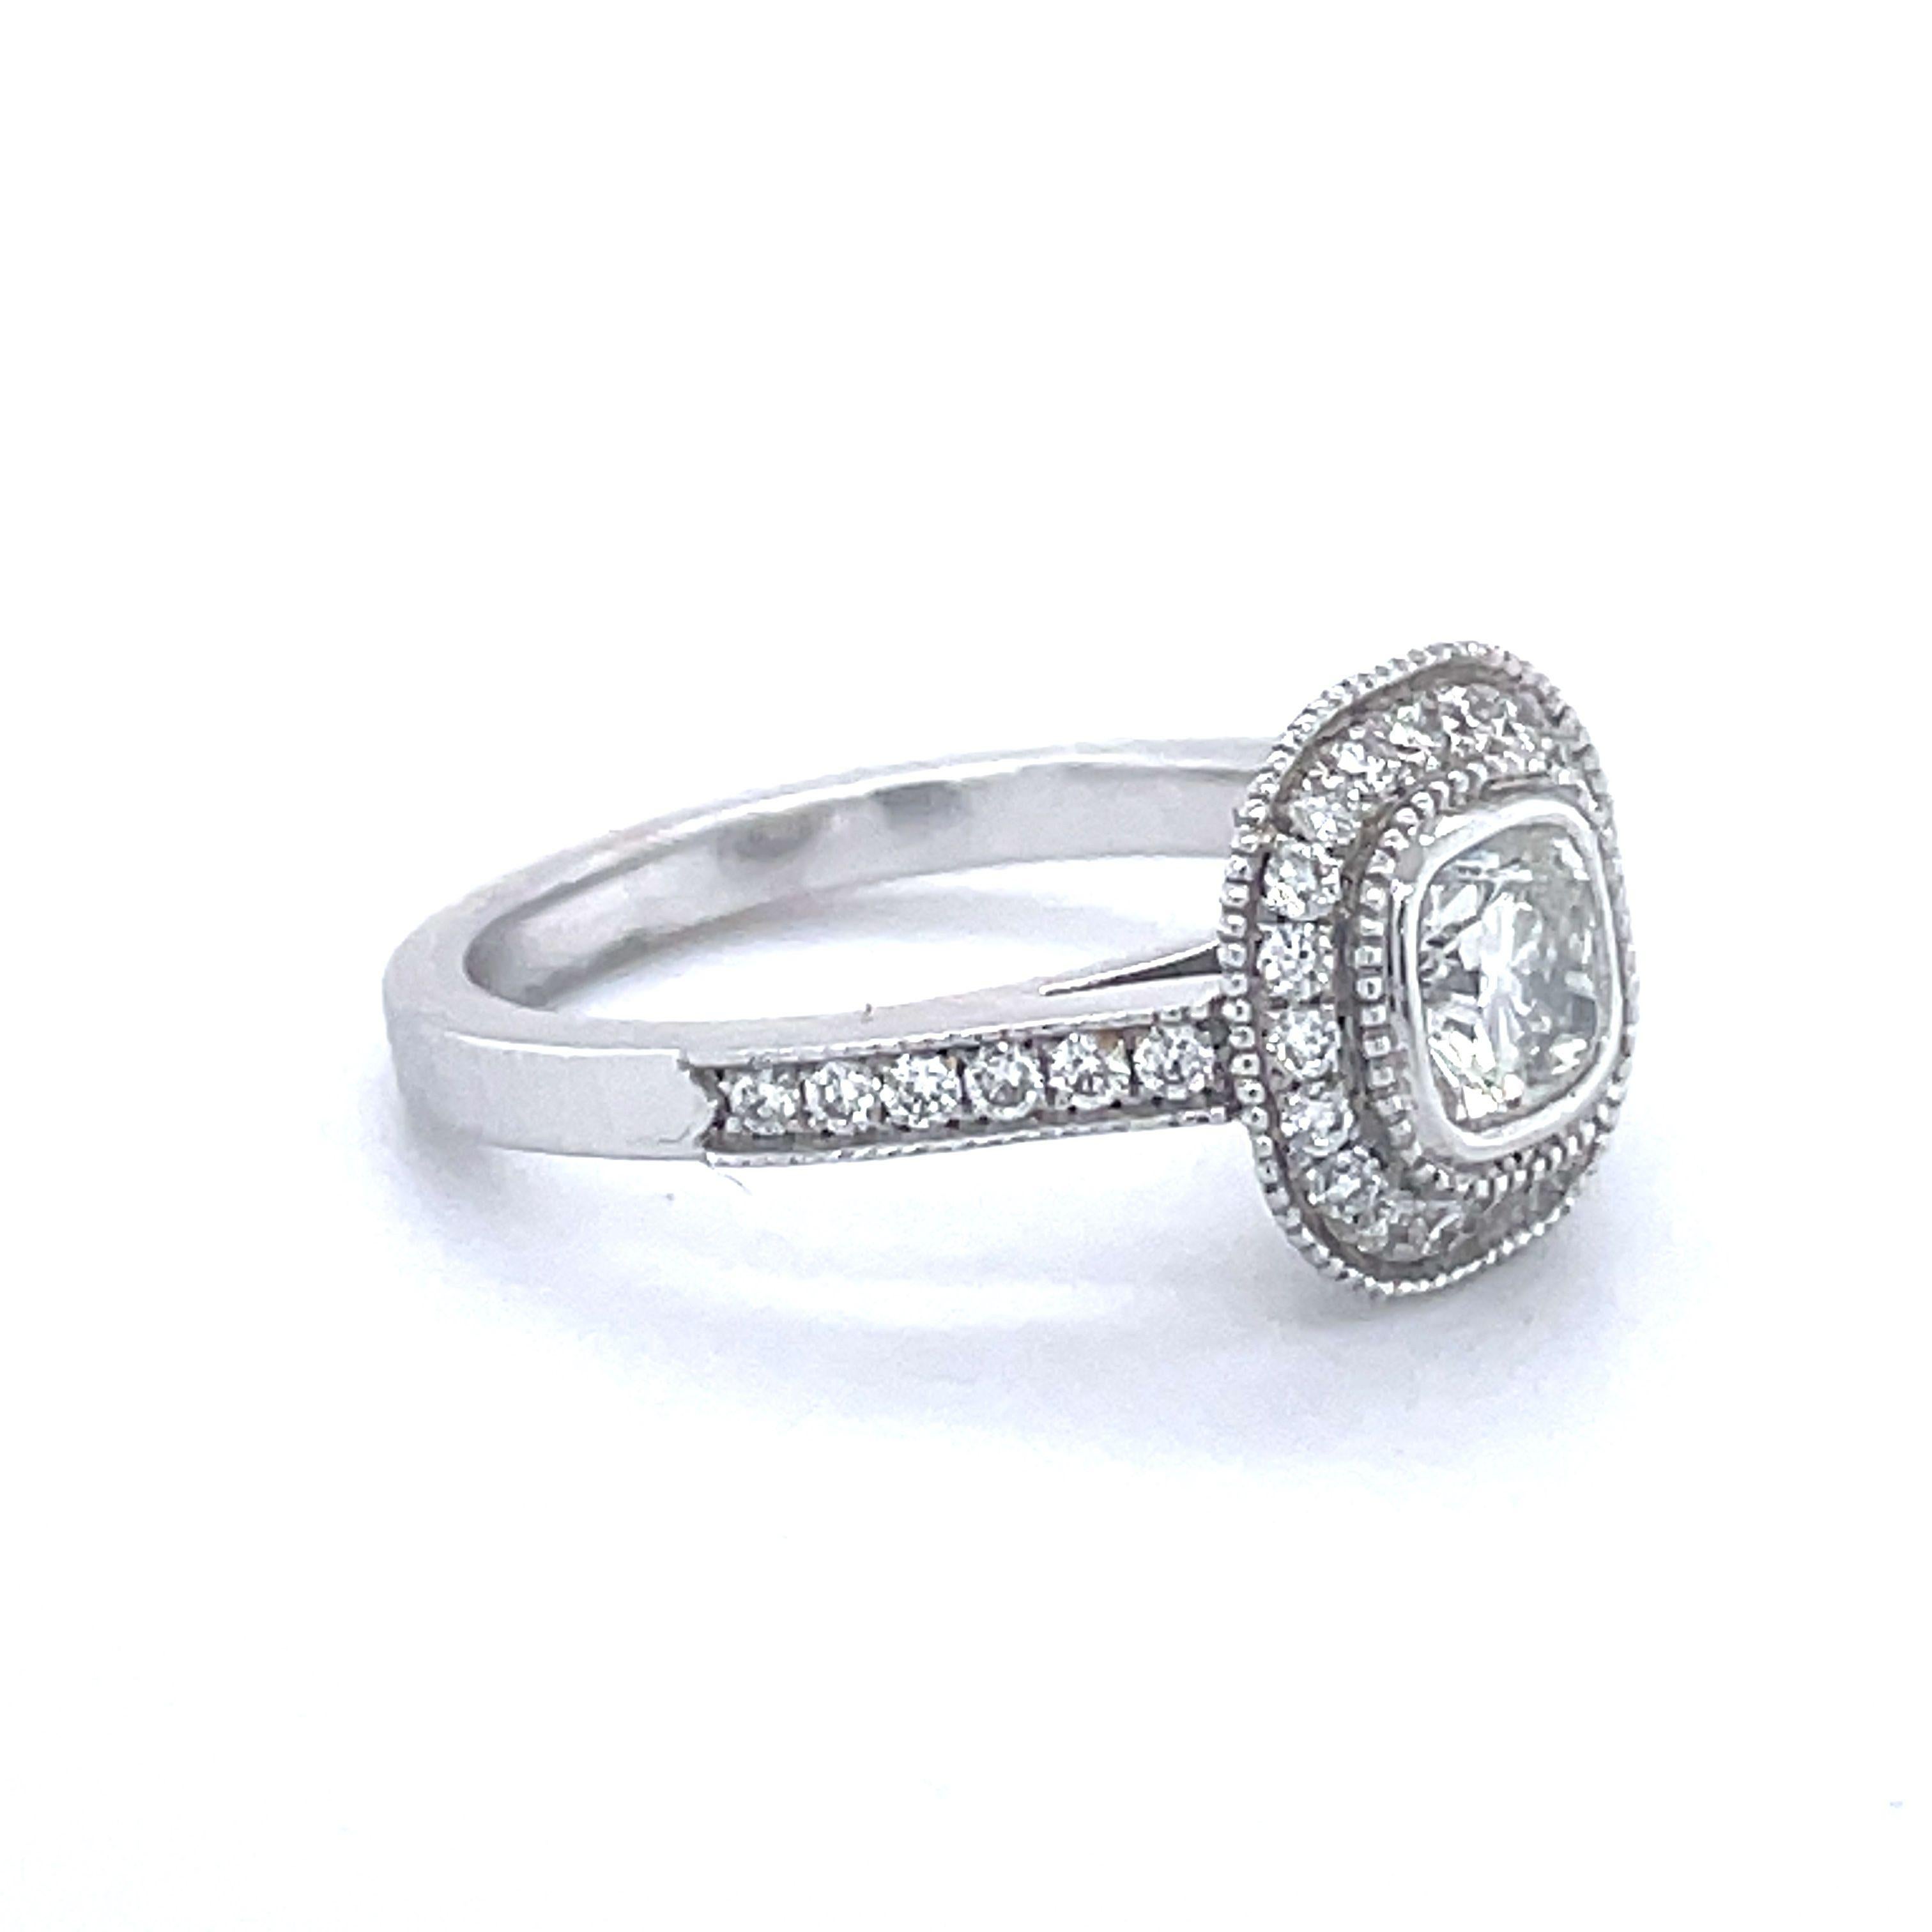 Engagement Ring, 0.82ct Cushion Cut Diamond, 14k White Gold, Halo Diamond Ring In New Condition For Sale In Ramat Gan, IL